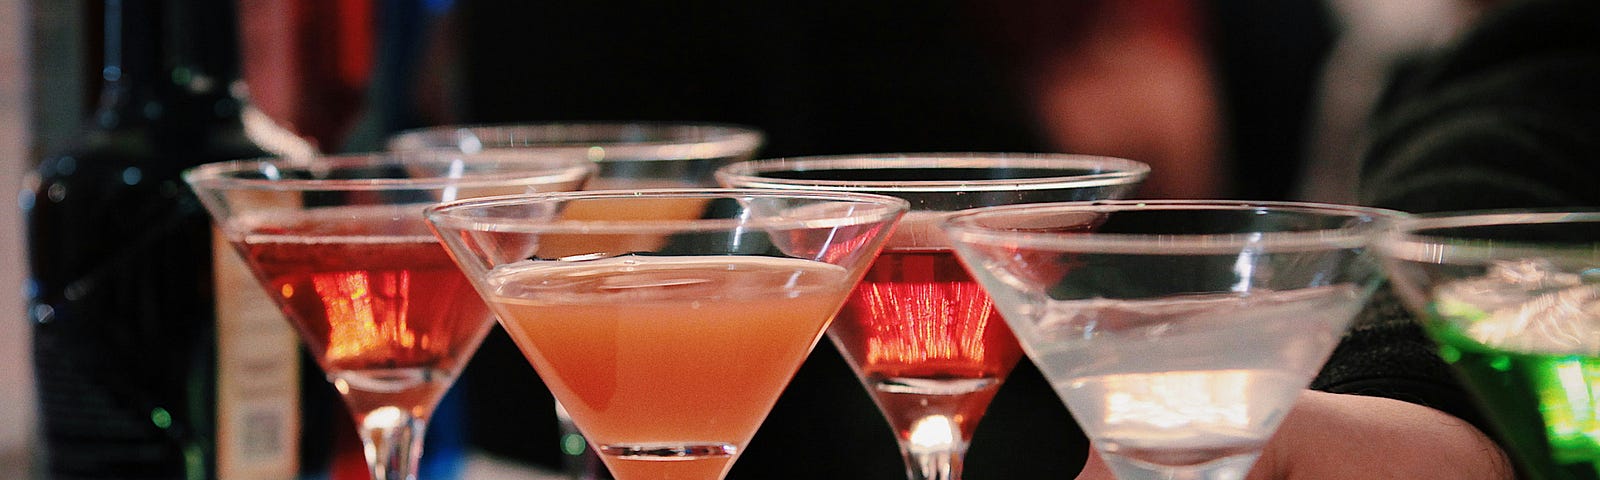 six martini glasses filled with different colored drinks on a bar counter